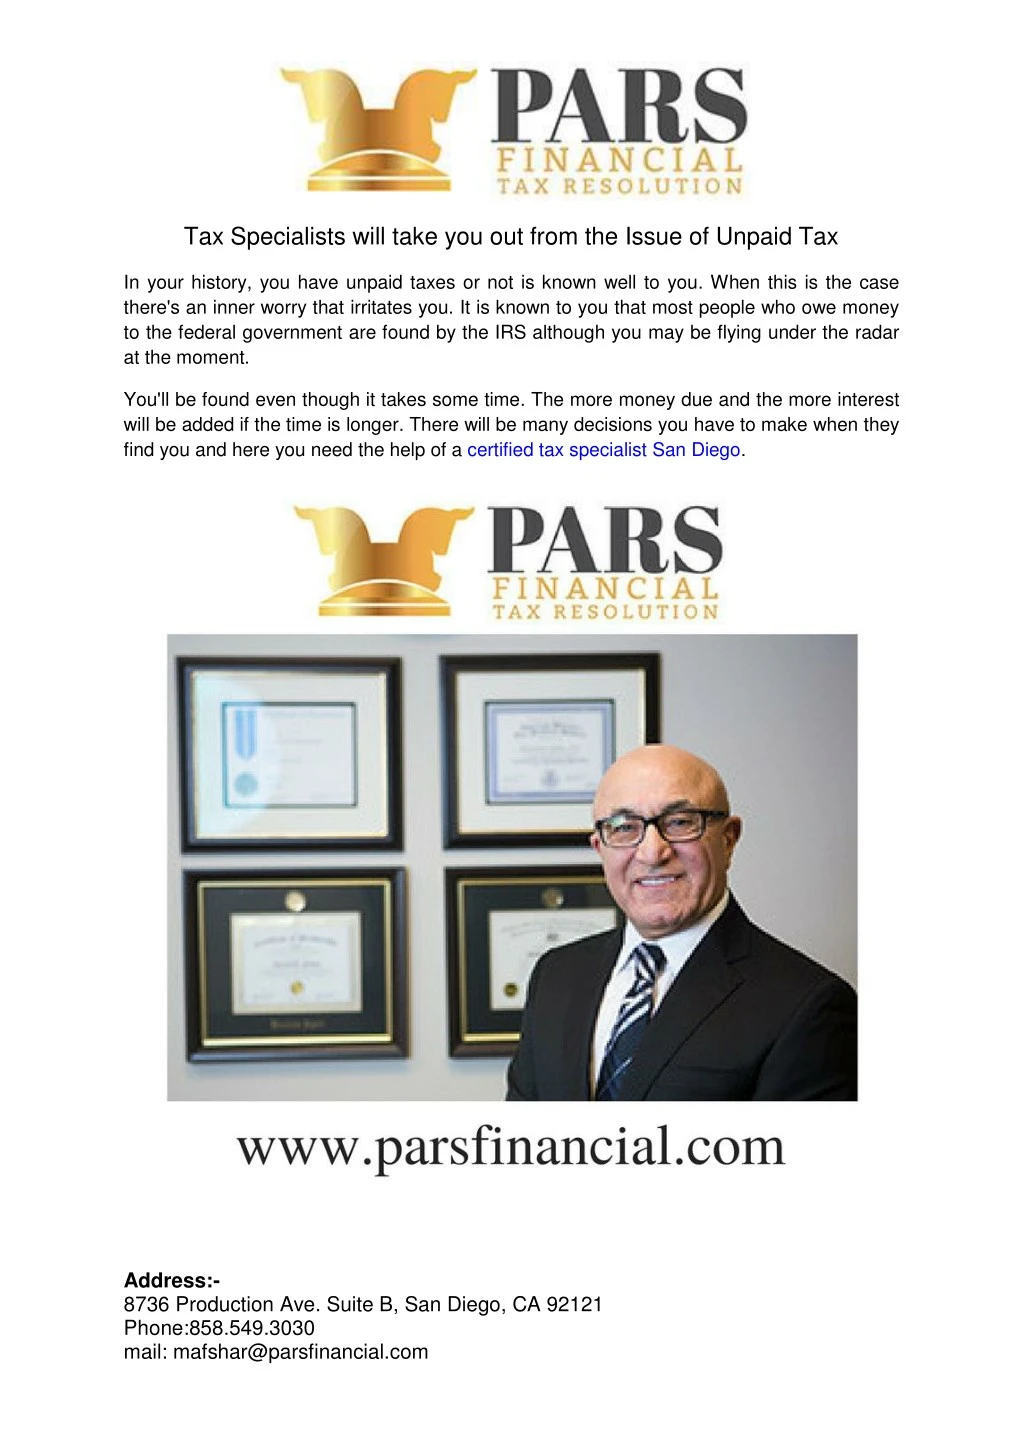 tax specialists will take you out from the issue